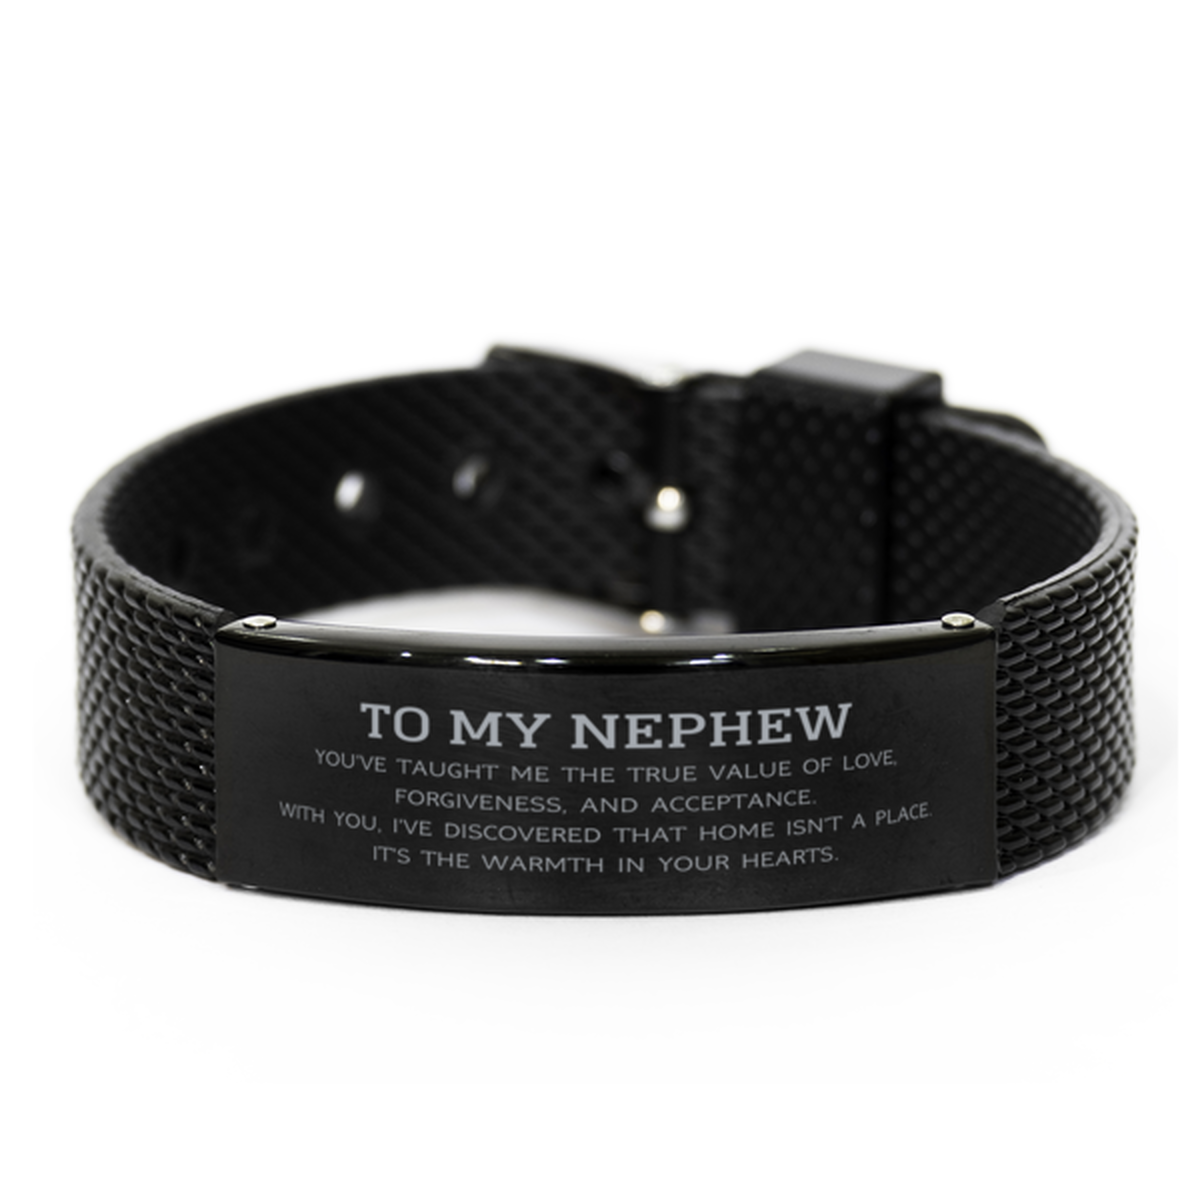 To My Nephew Gifts, You've taught me the true value of love, Thank You Gifts For Nephew, Birthday Black Shark Mesh Bracelet For Nephew